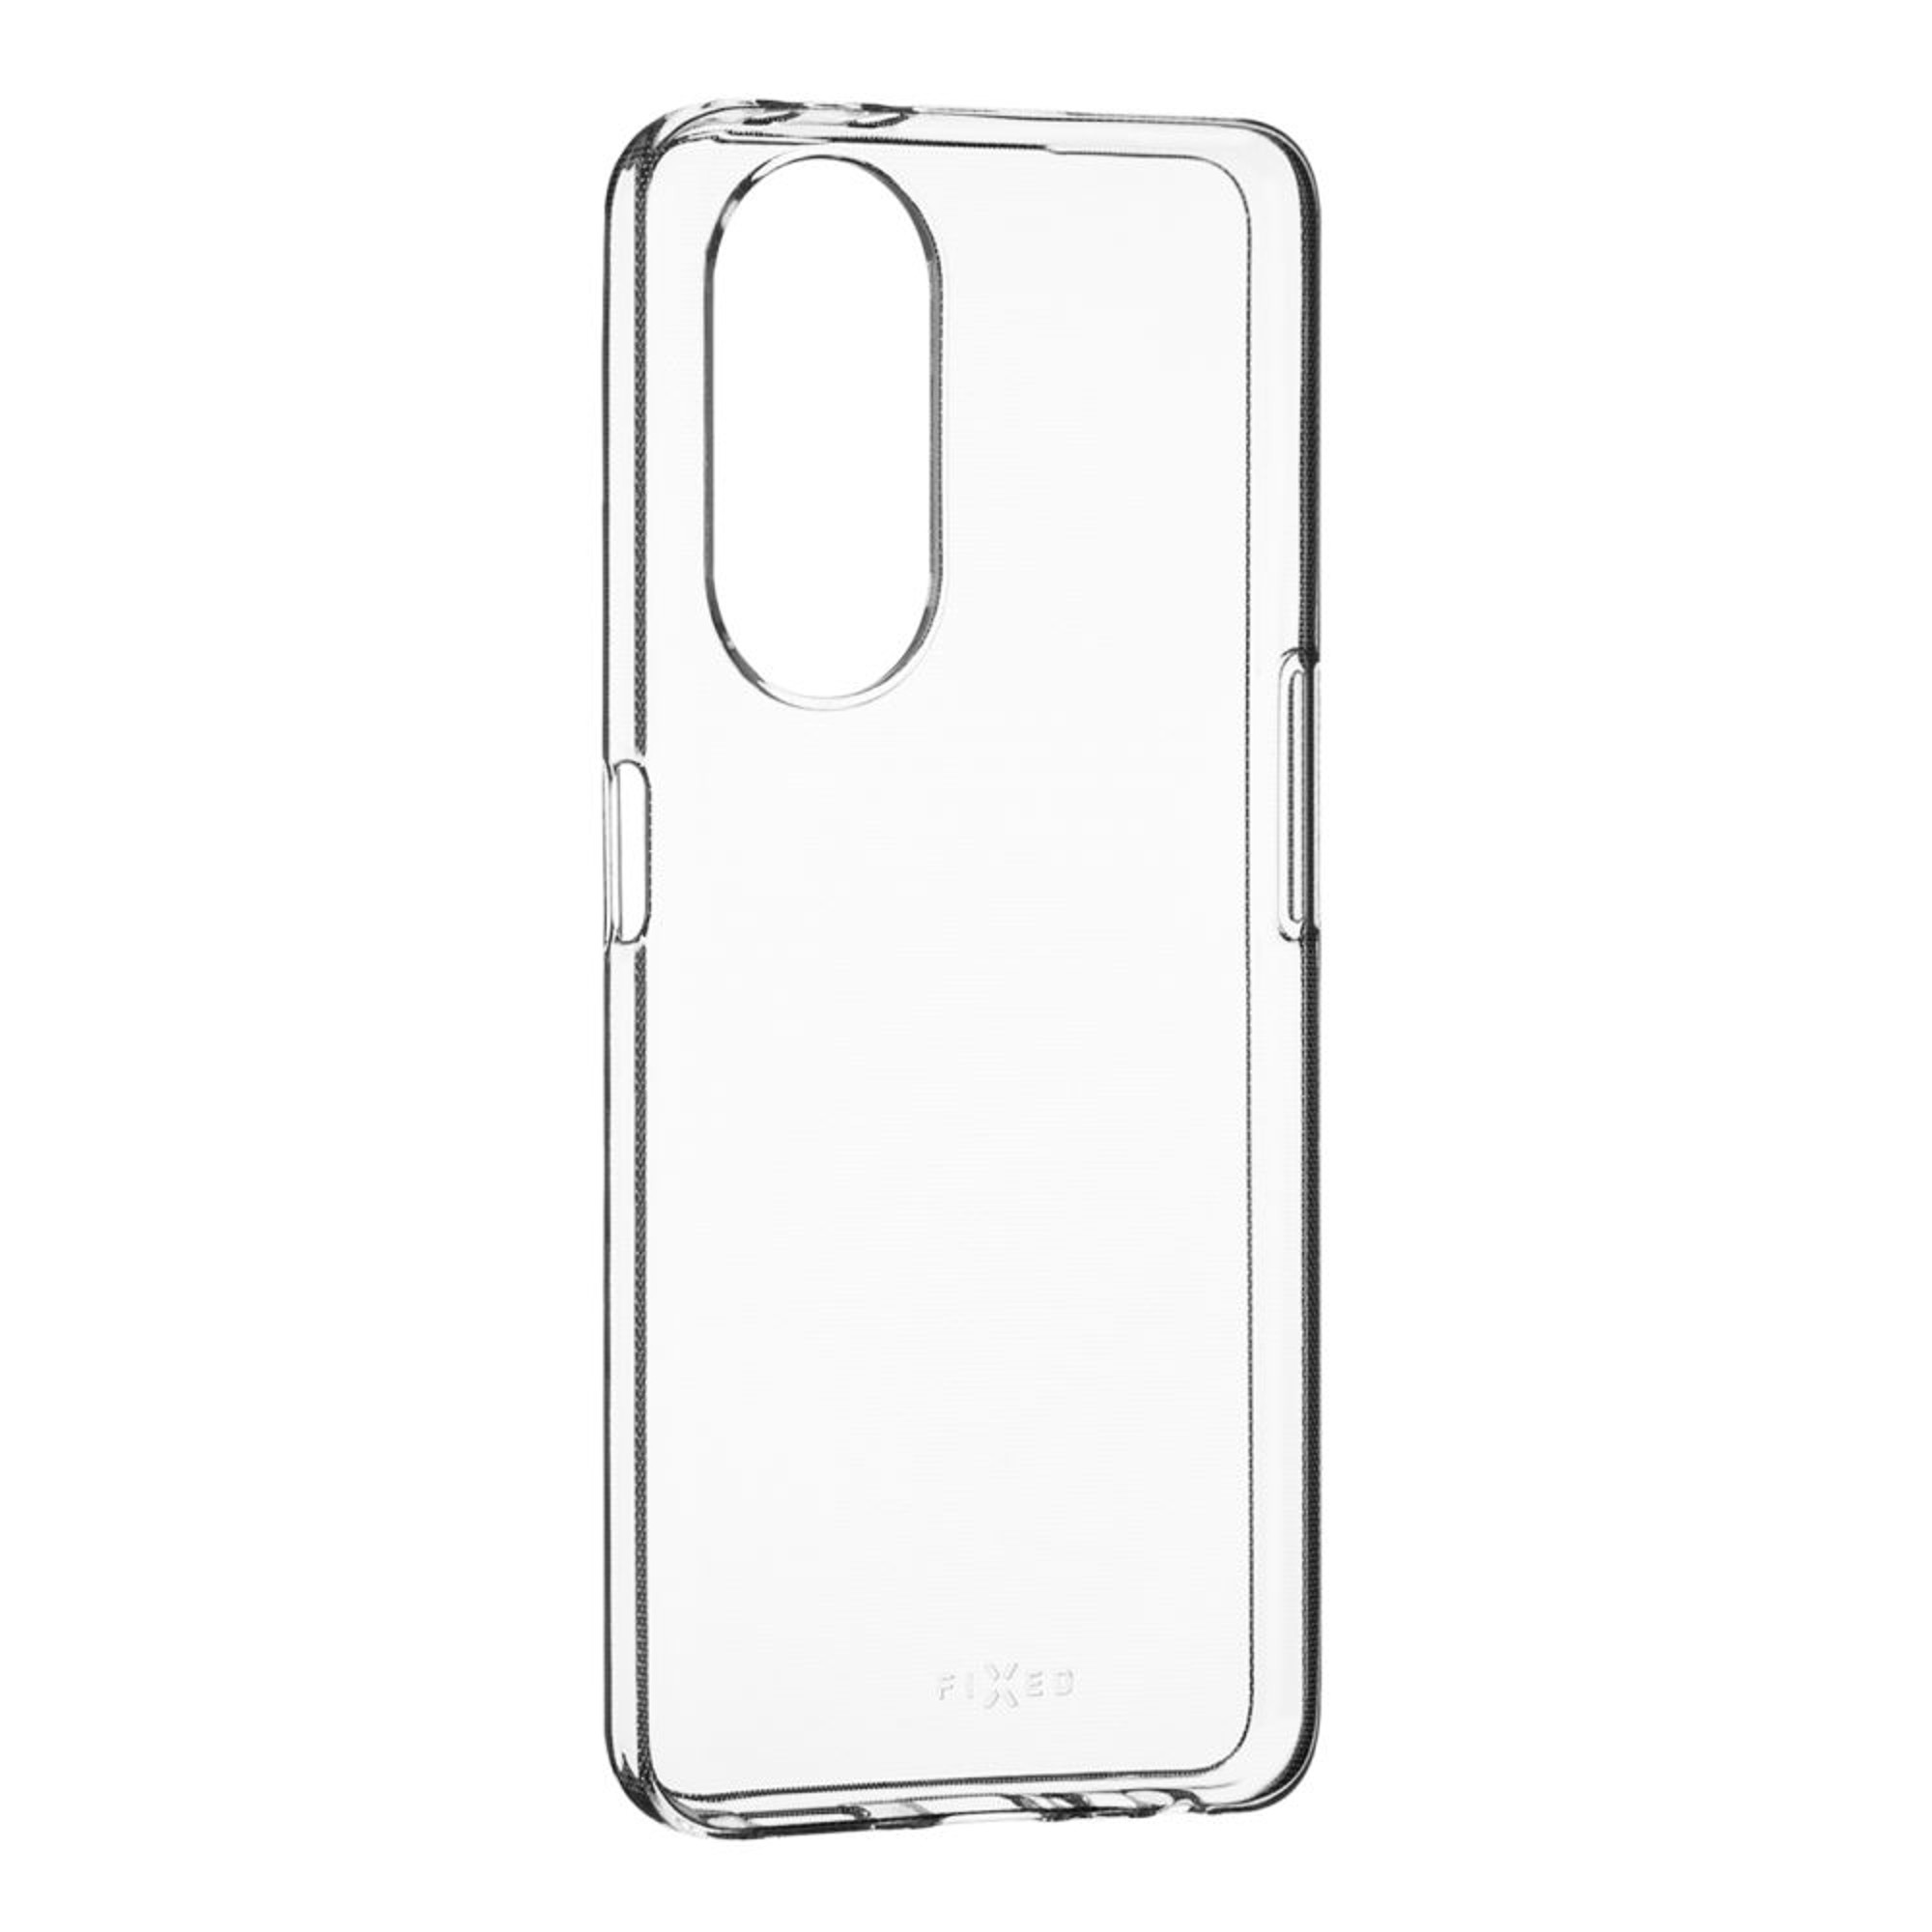 F23 Transparent Oppo, FIXTCC-1169, FIXED 5G, Backcover,